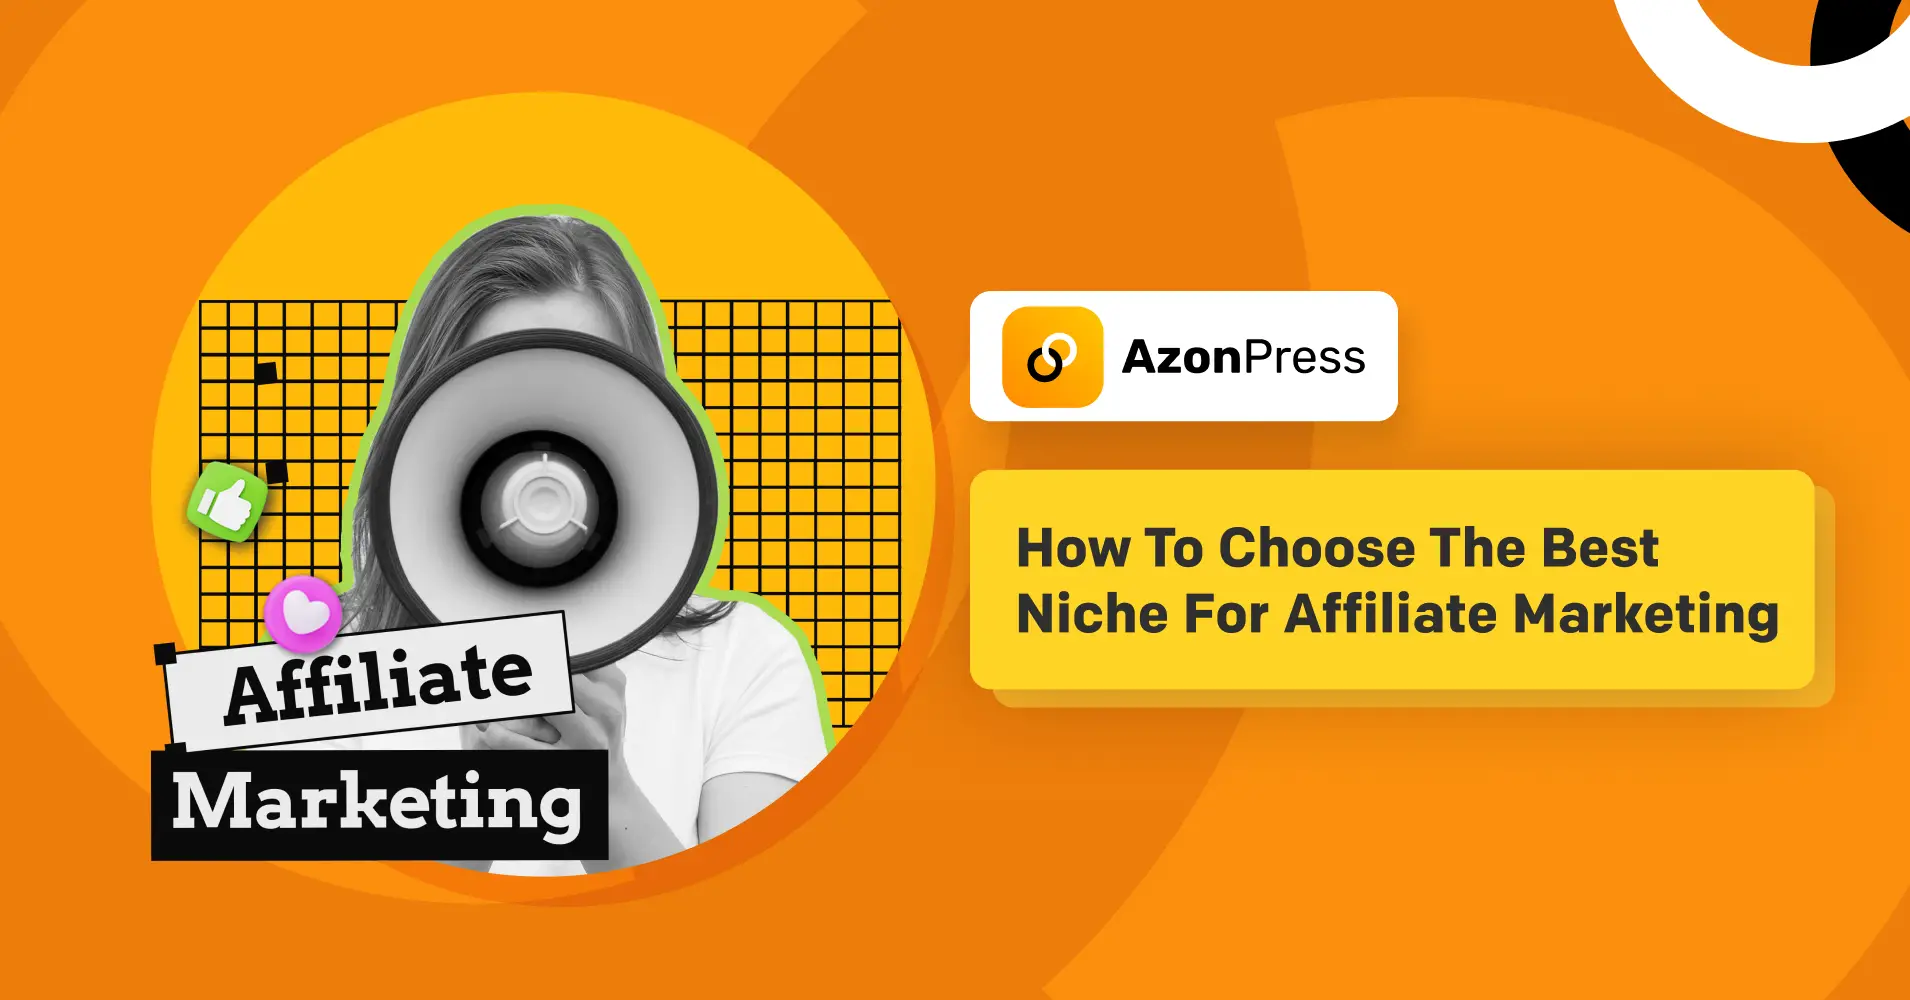 How To Choose The Best Niche For Affiliate Marketing